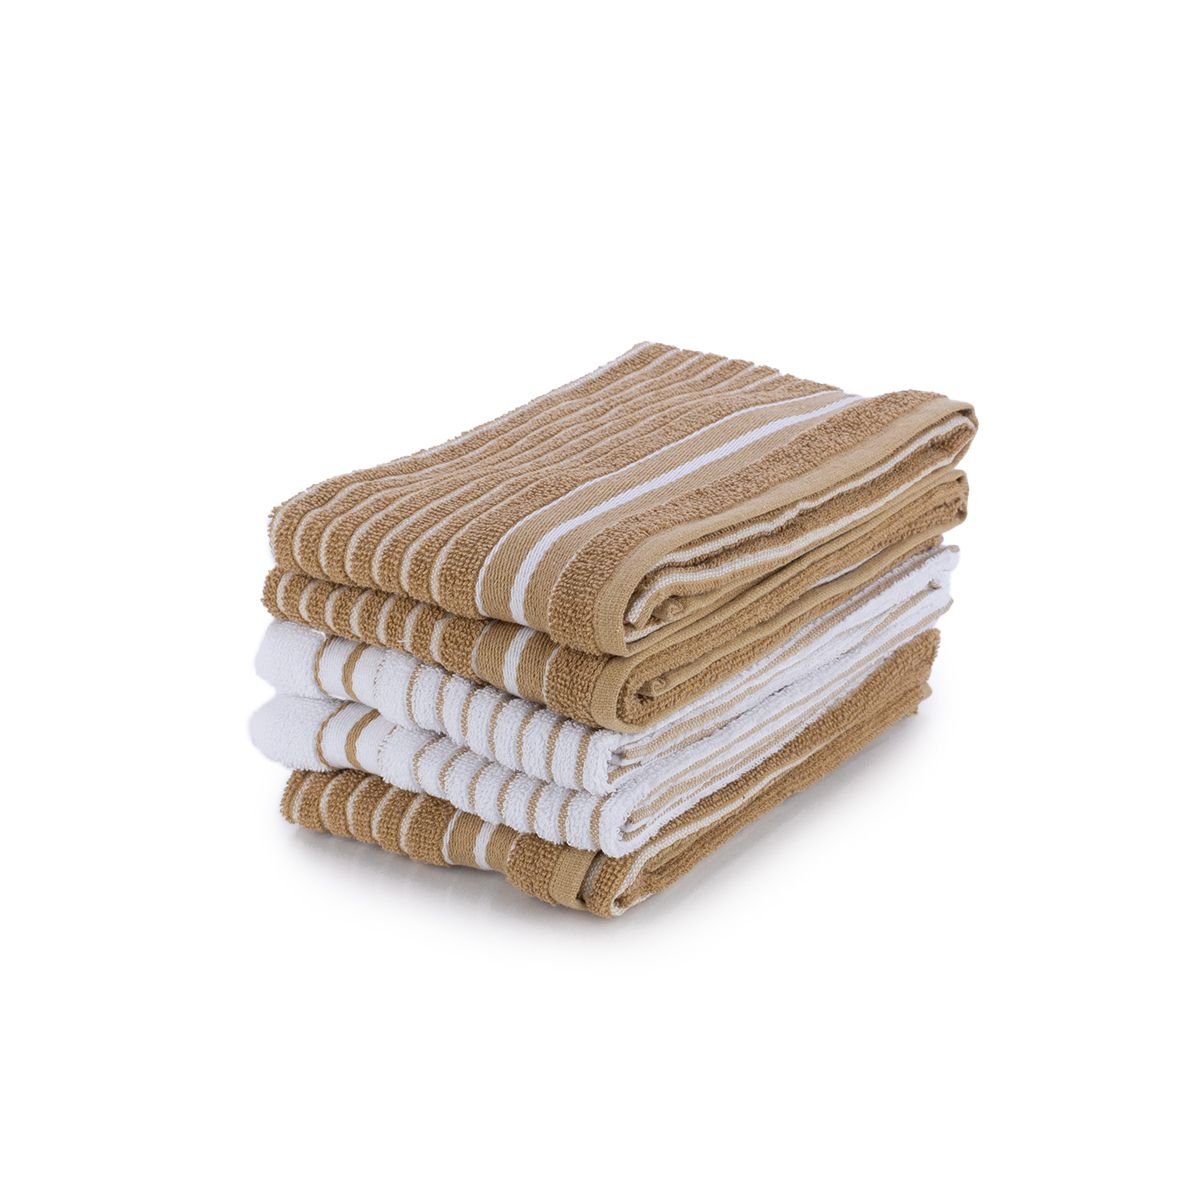 Everything Kitchens Modern Essentials Oversized Recycled Cotton Terry Kitchen Towels (Set of 5) | Tan & White